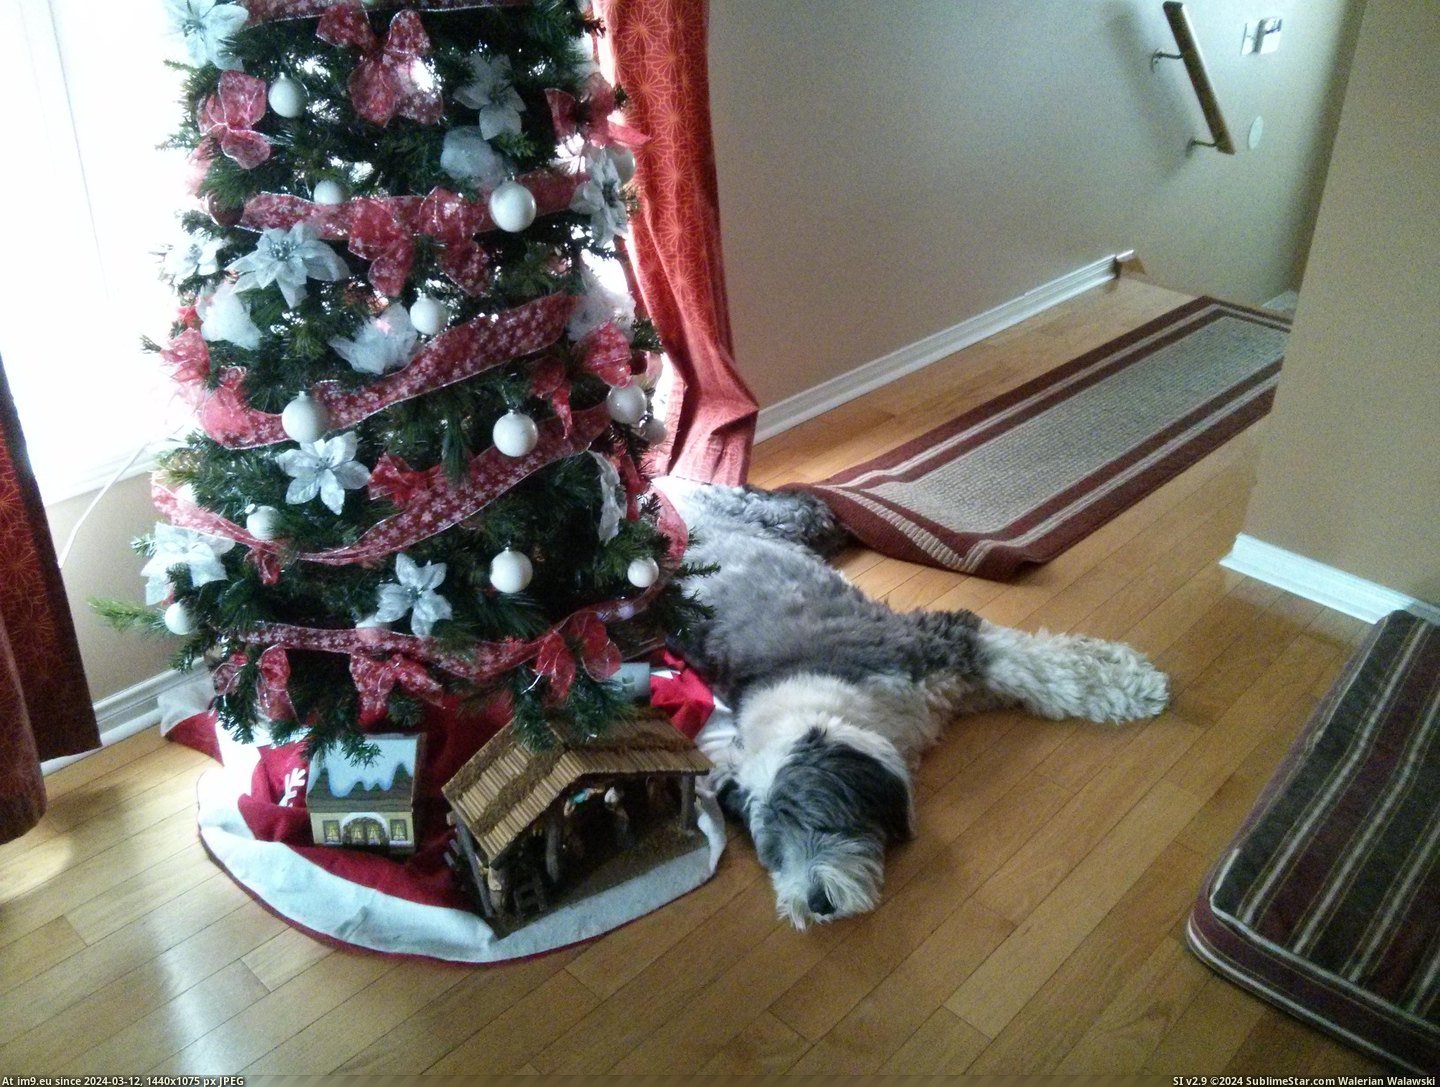 #Christmas #Tree #Usual #Spot #Mad [Aww] He's mad that the christmas tree took his usual spot Pic. (Bild von album My r/AWW favs))